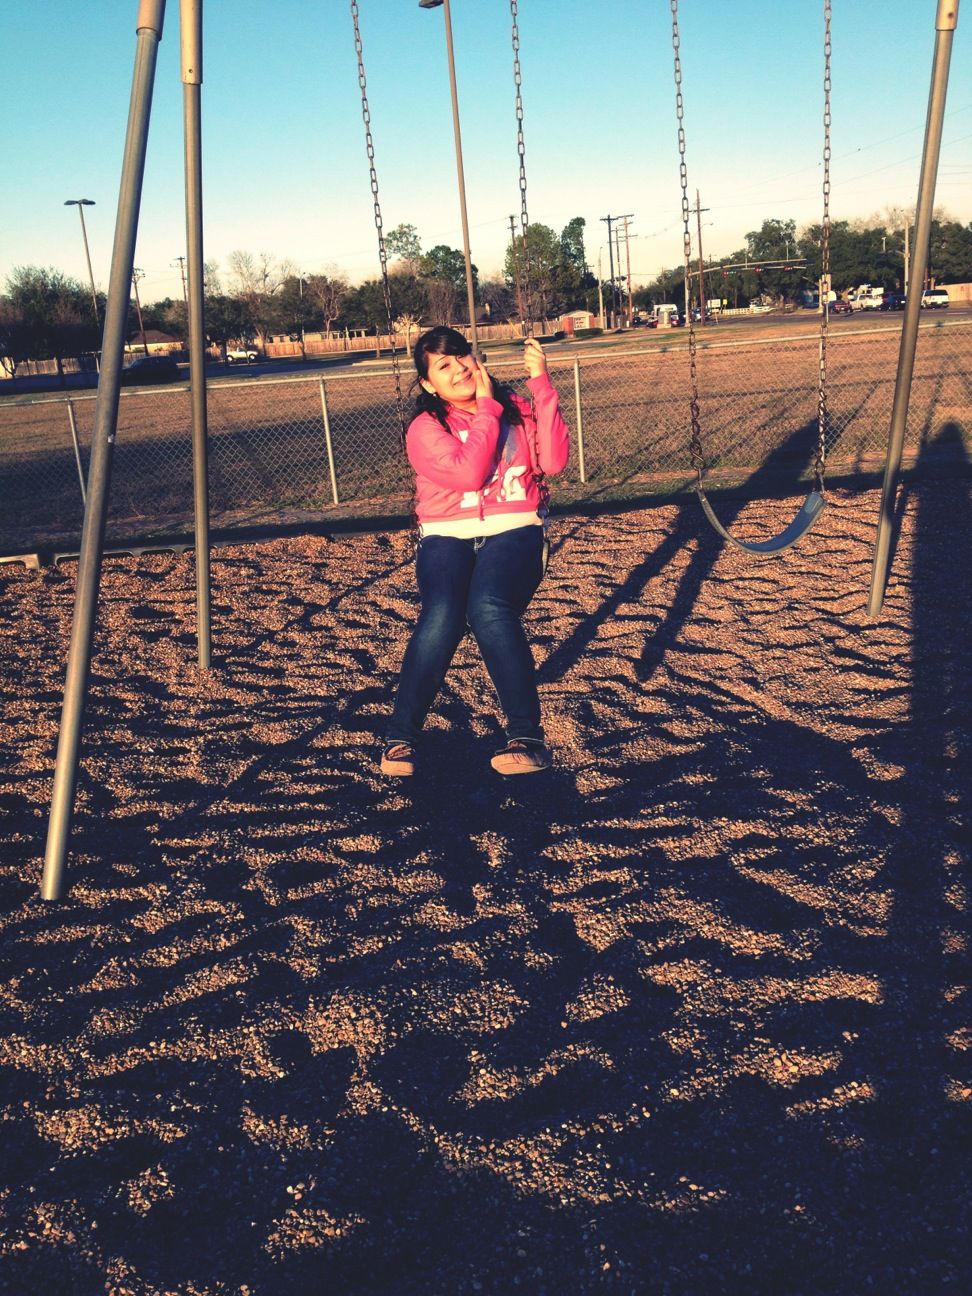 The park yesterday!(: